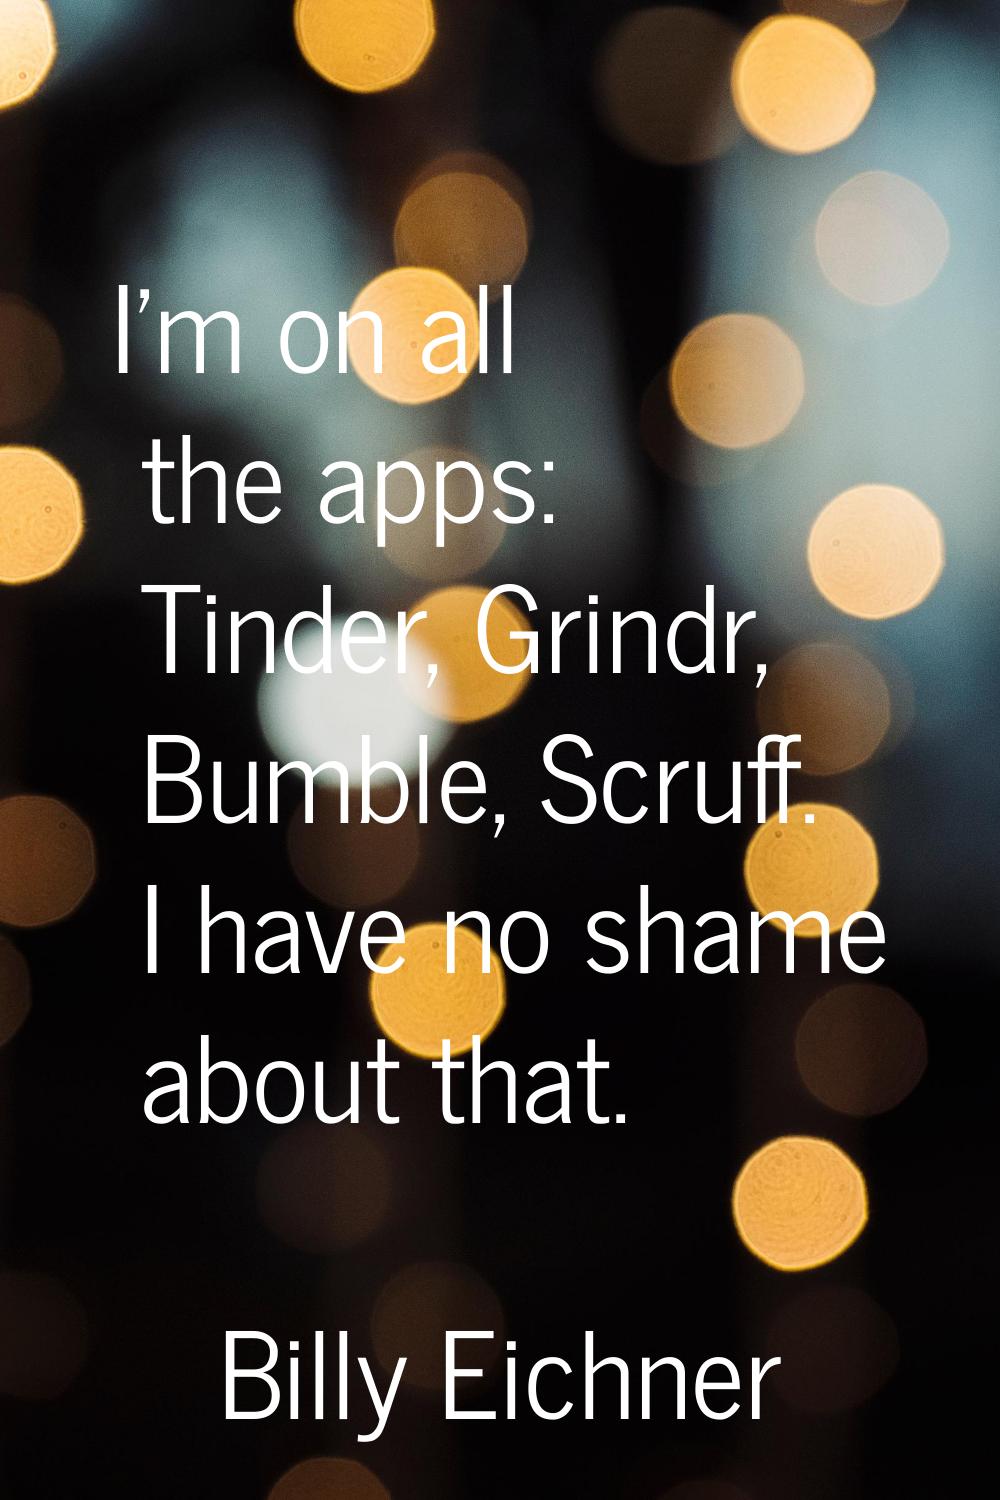 I'm on all the apps: Tinder, Grindr, Bumble, Scruff. I have no shame about that.